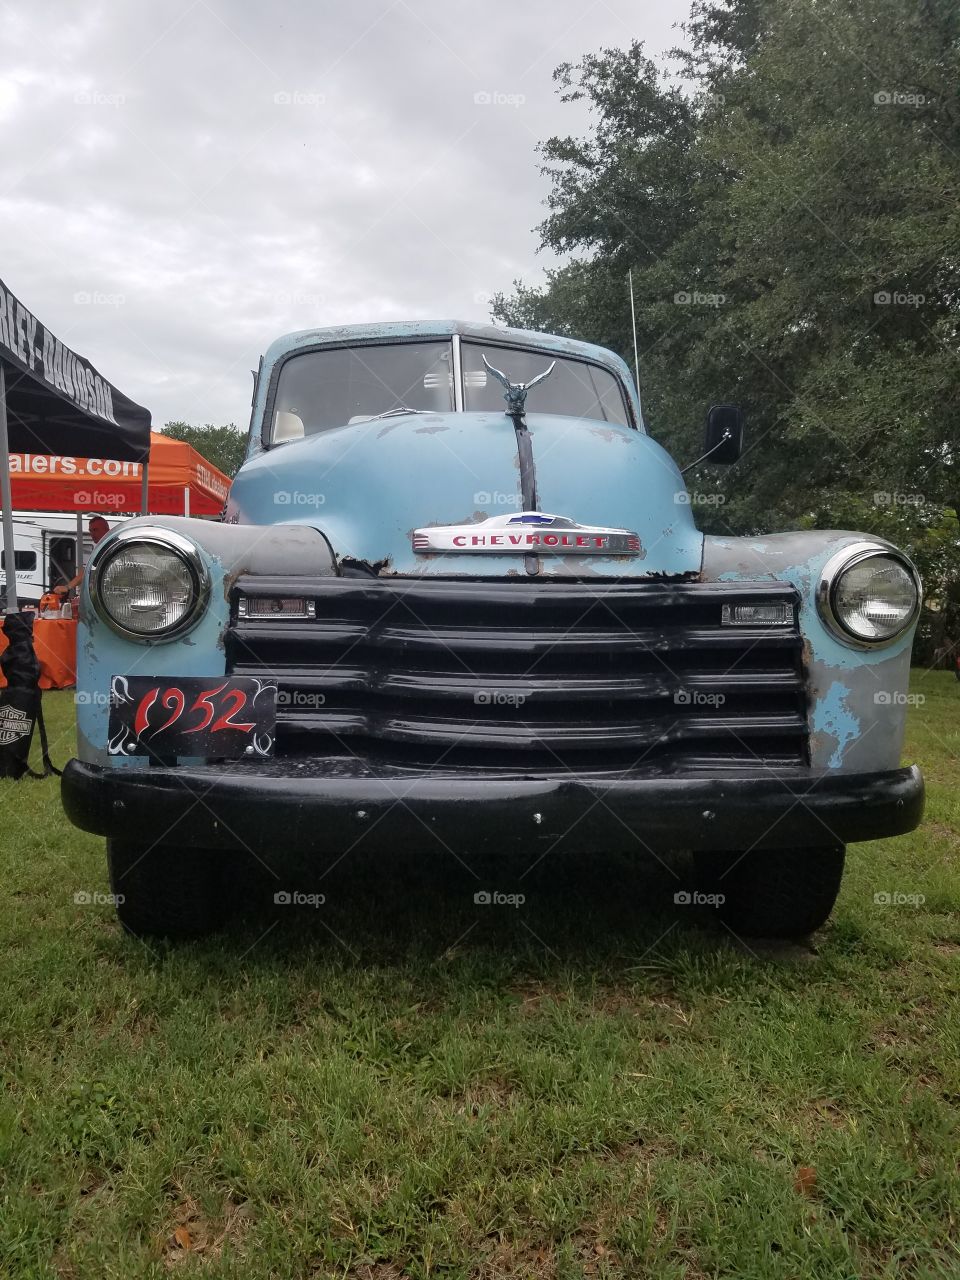 1952 Chevy pic up